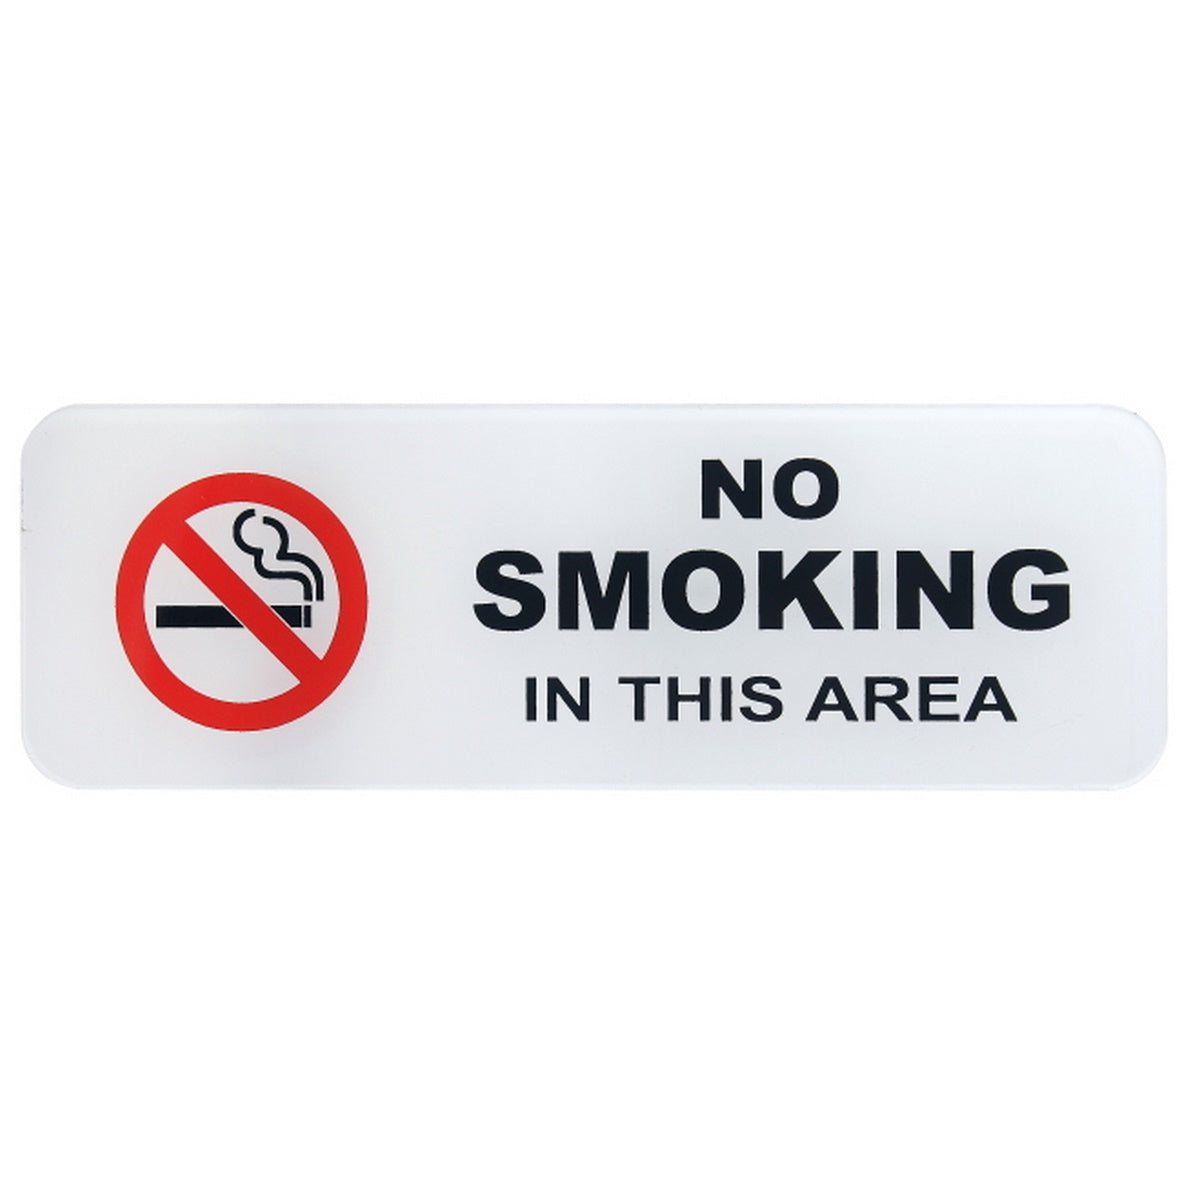 No Smoking In This Area Self Adhesive Sticker - For Shops, Hospitals, Schools, Corporates, Offices JASWNSITA